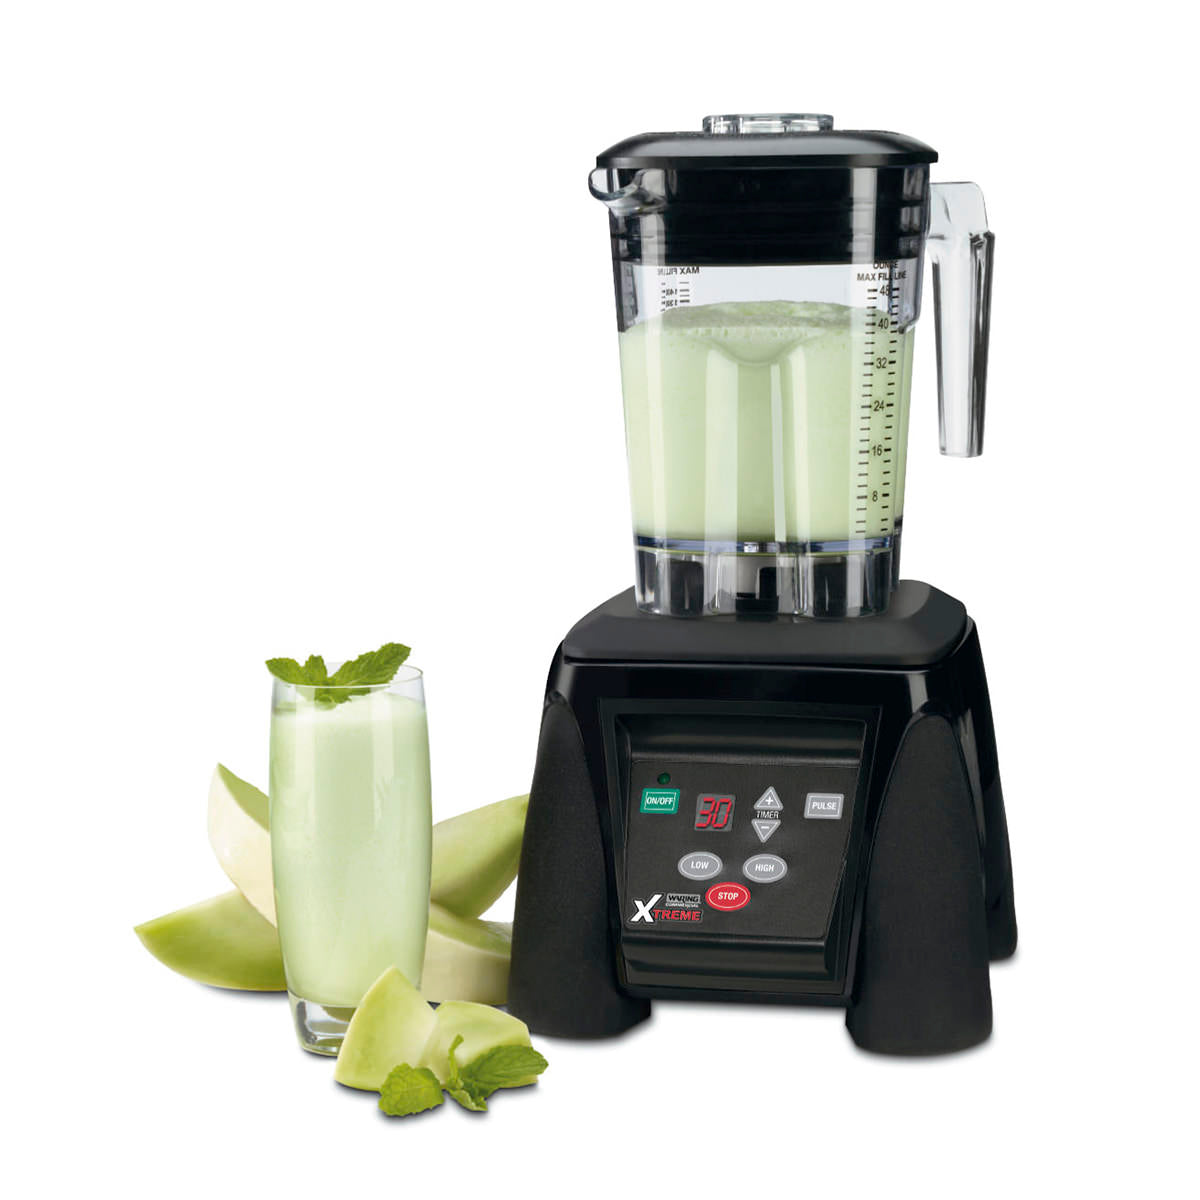 MX1100XTXP Heavy-Duty Blender with Electronic Keypad, Timer & Stackable 48 oz Copolyester Jar by Waring Commercial